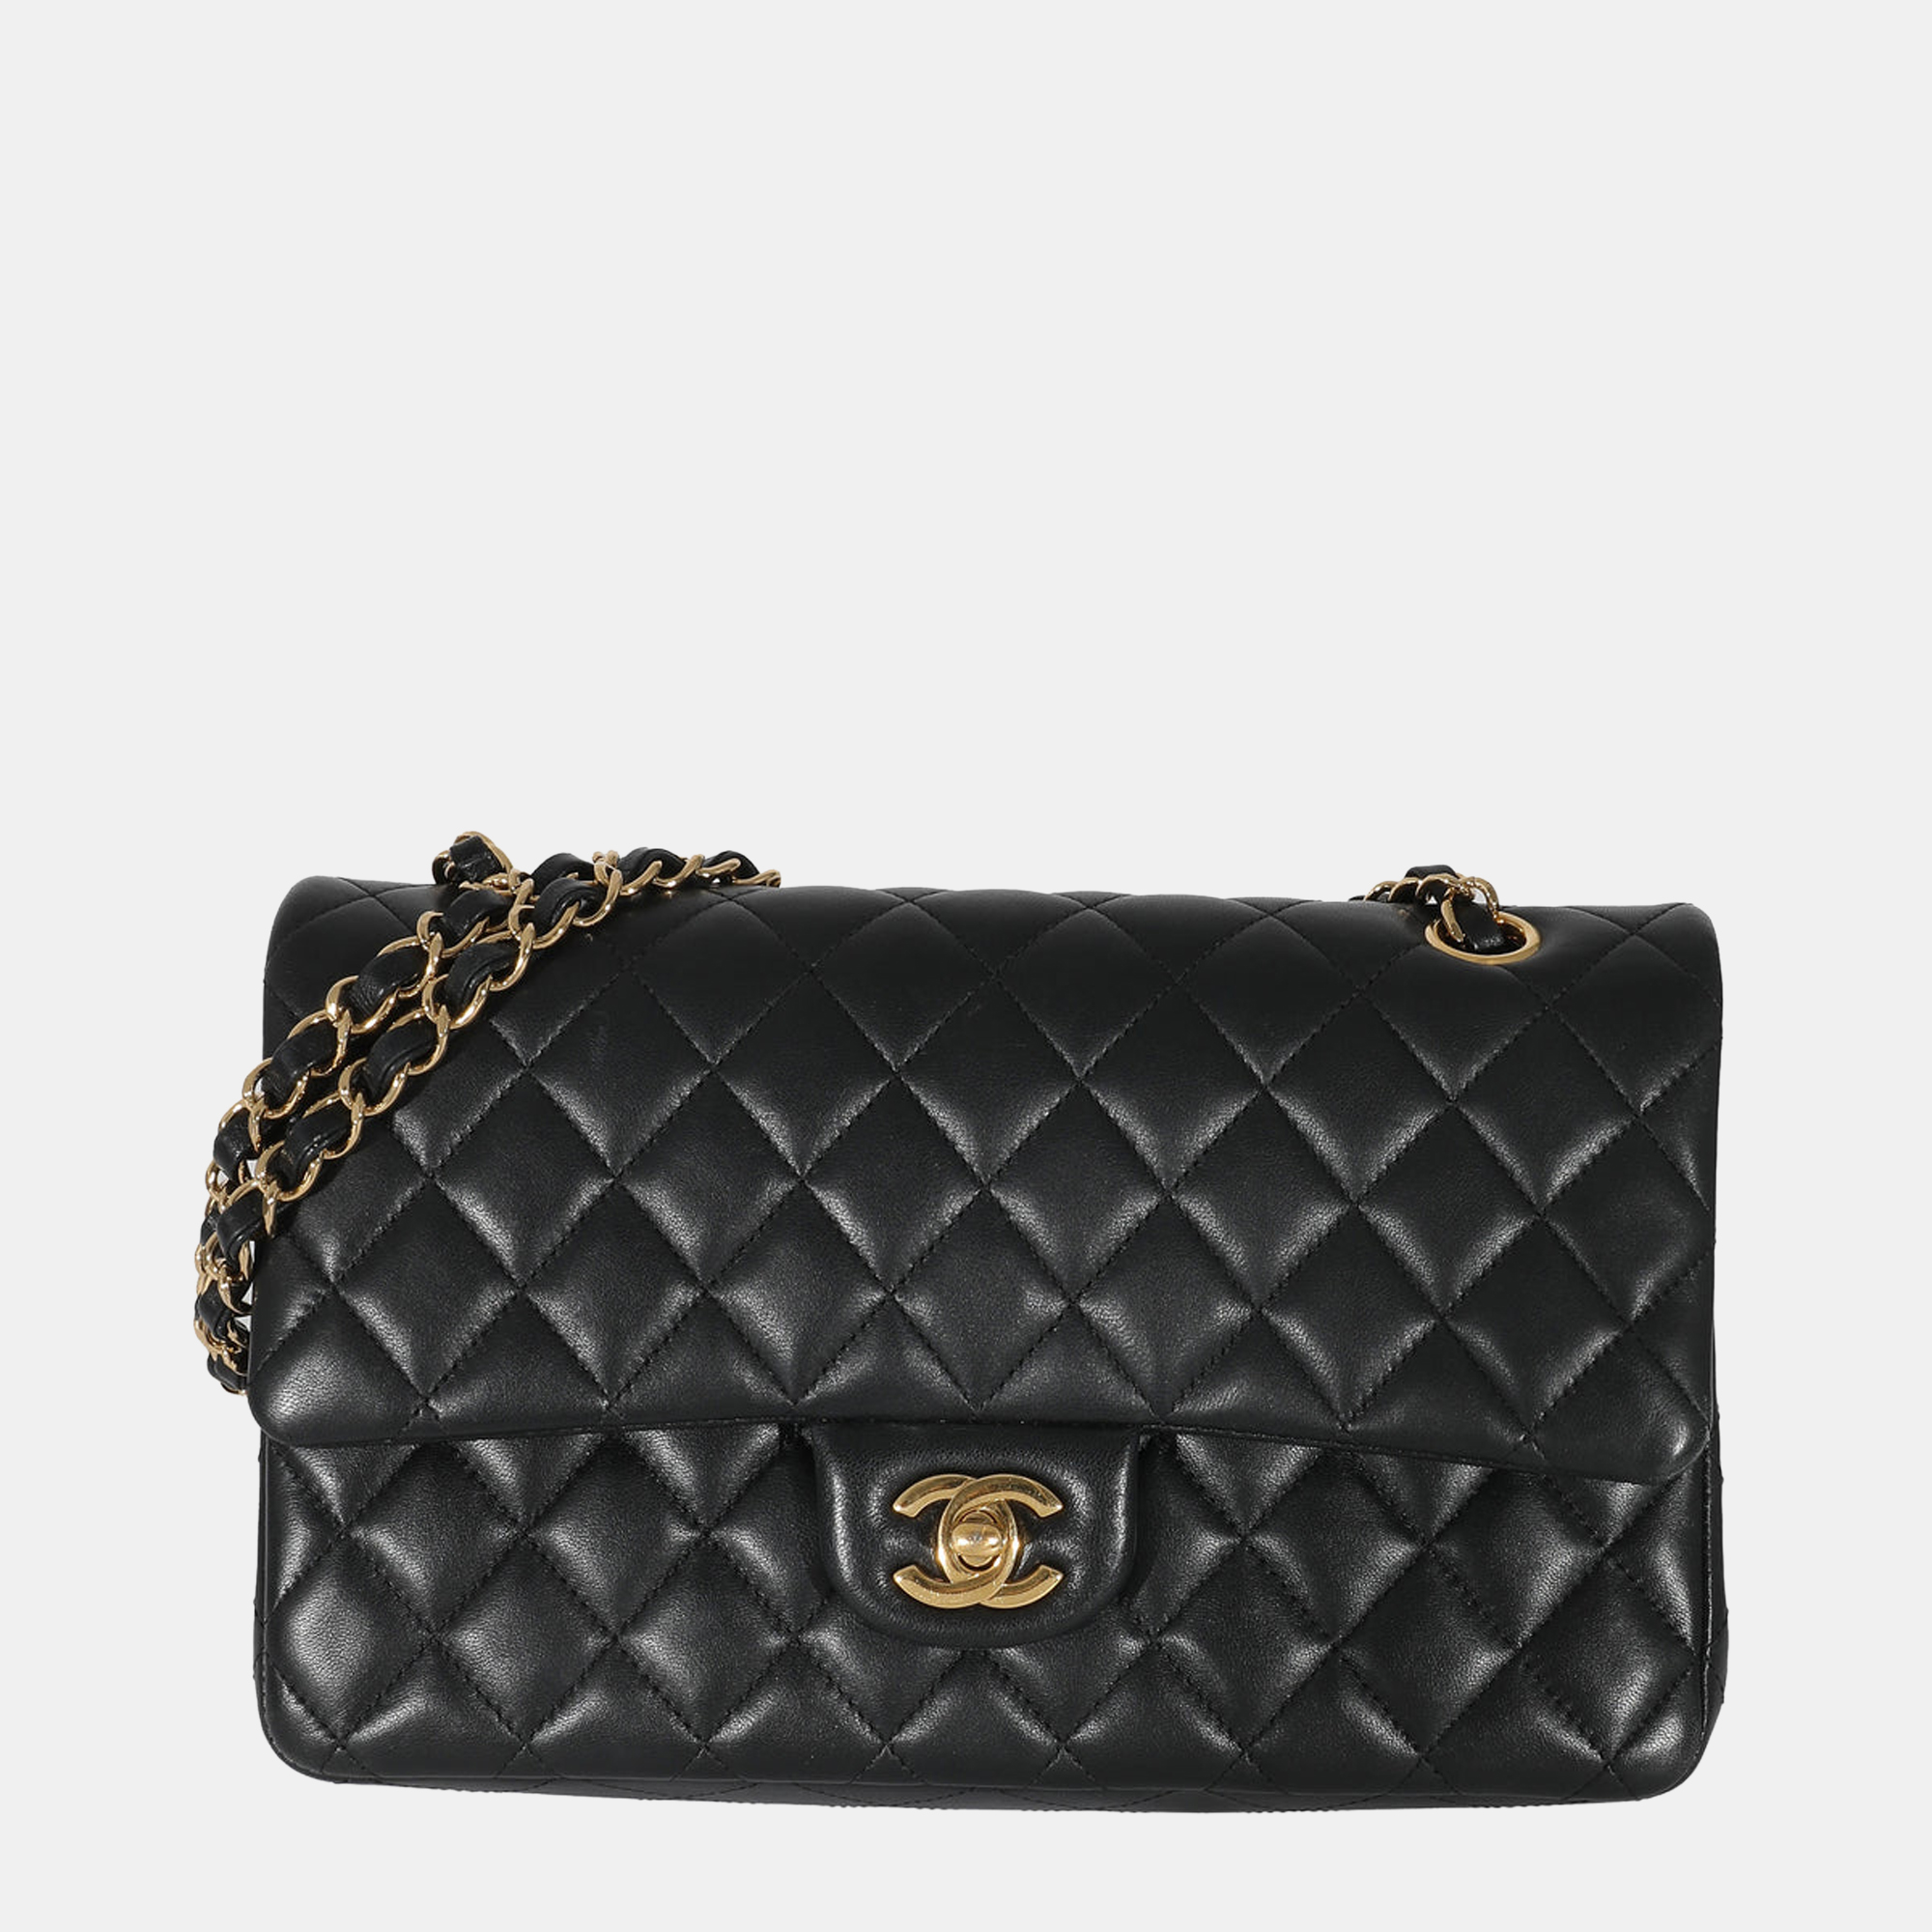 Carry everything you need in style thanks to this Chanel Flap Bag. Crafted from the best materials this is an accessory that promises enduring style and usage.